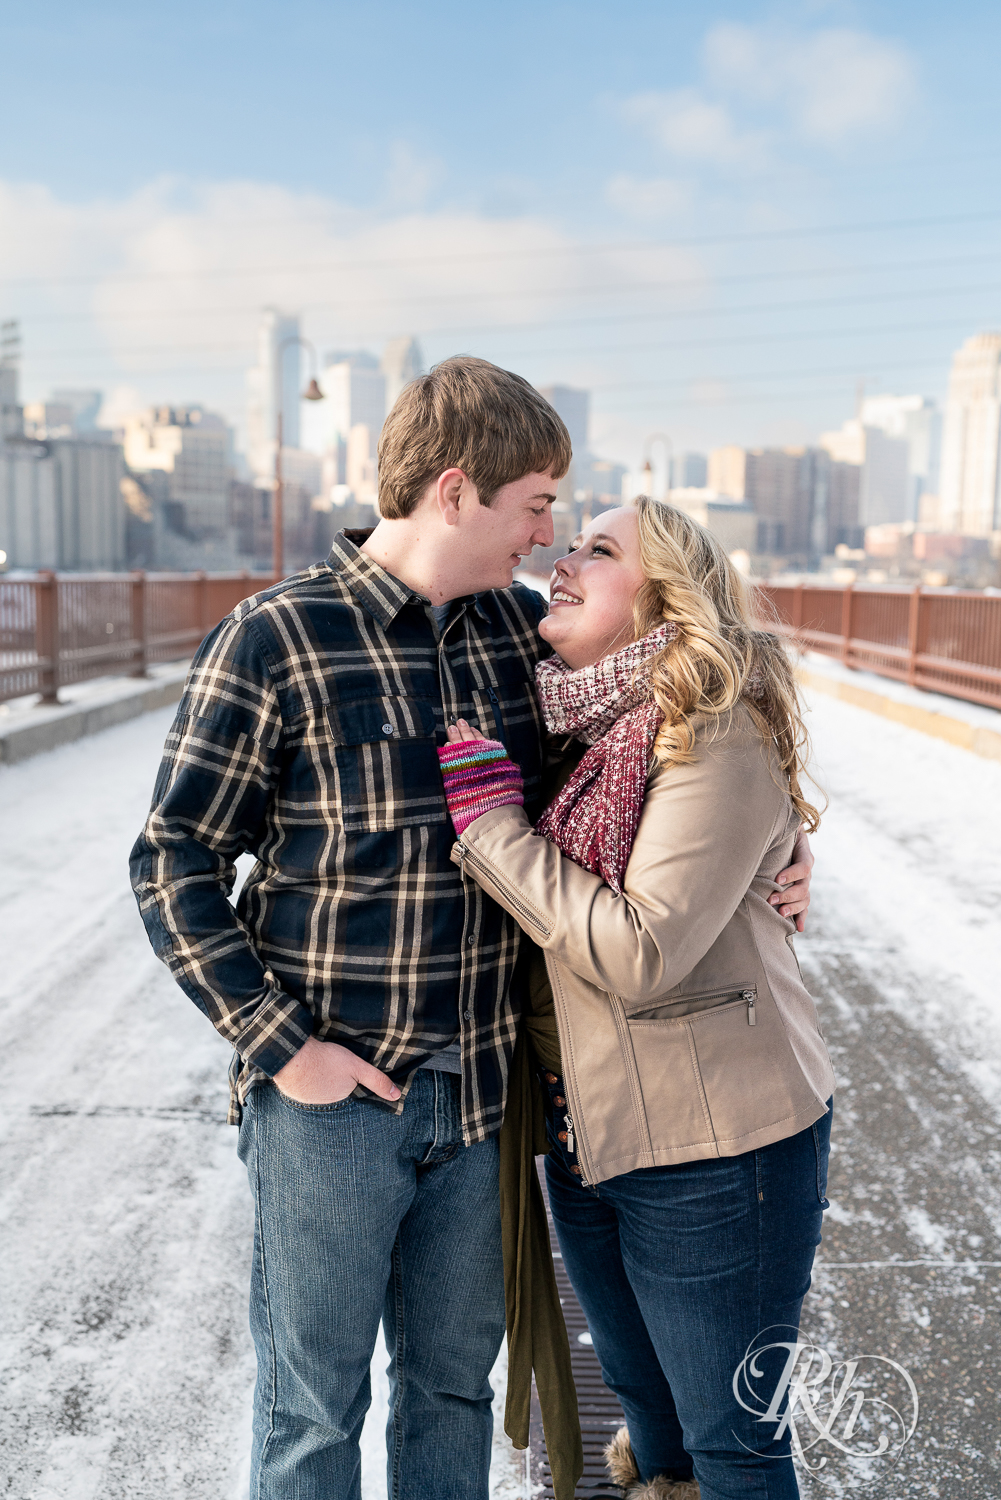 Man and woman smiling in the snow on the Stone Arch Bridge in Minneapolis, Minnesota.